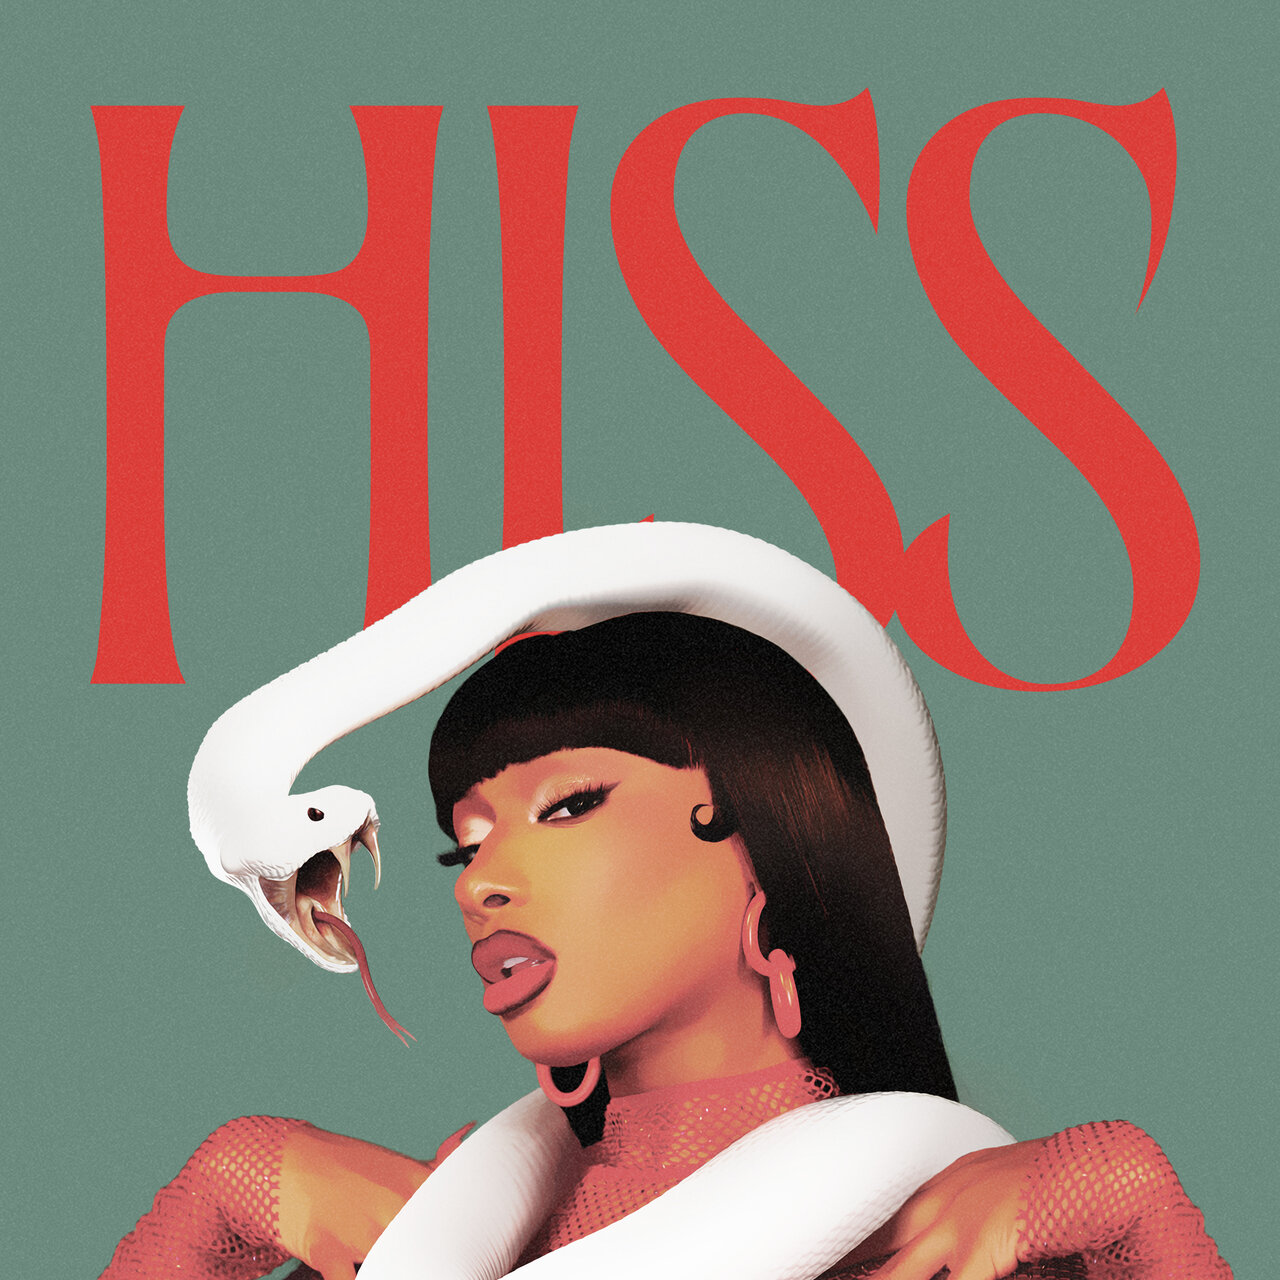 Megan Thee Stallion - Hiss (Cover)